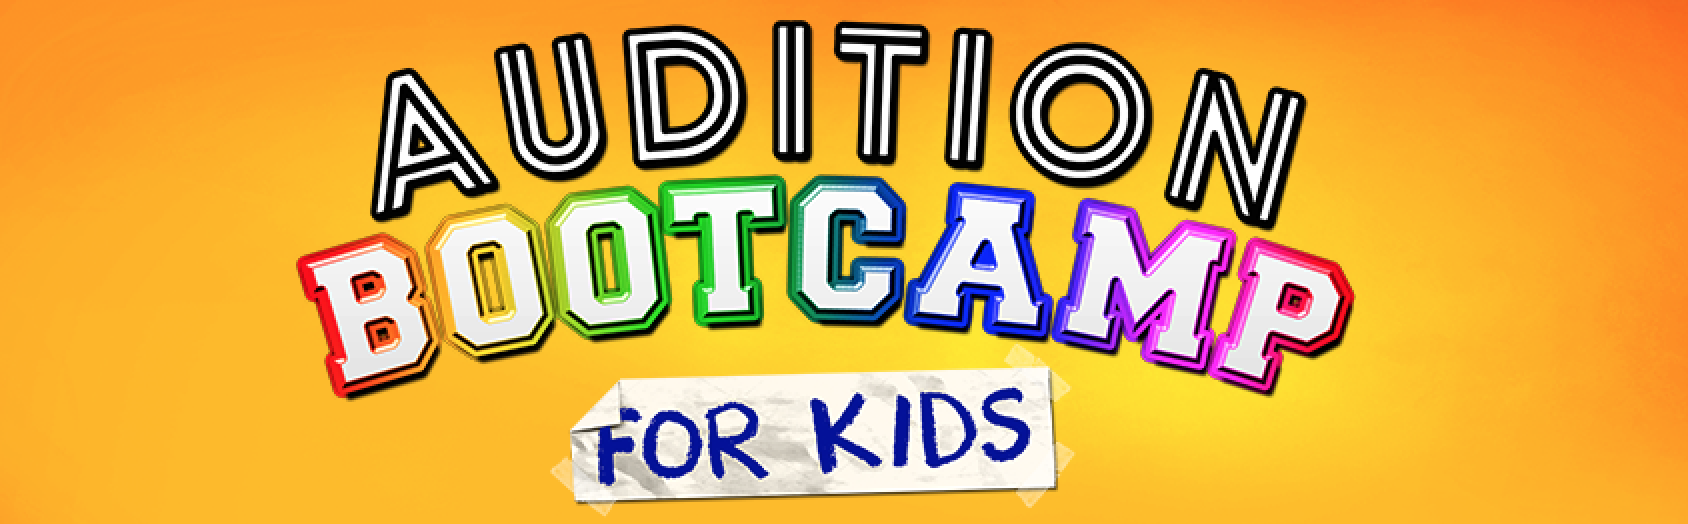 Audition Bootcamp for Kids poster